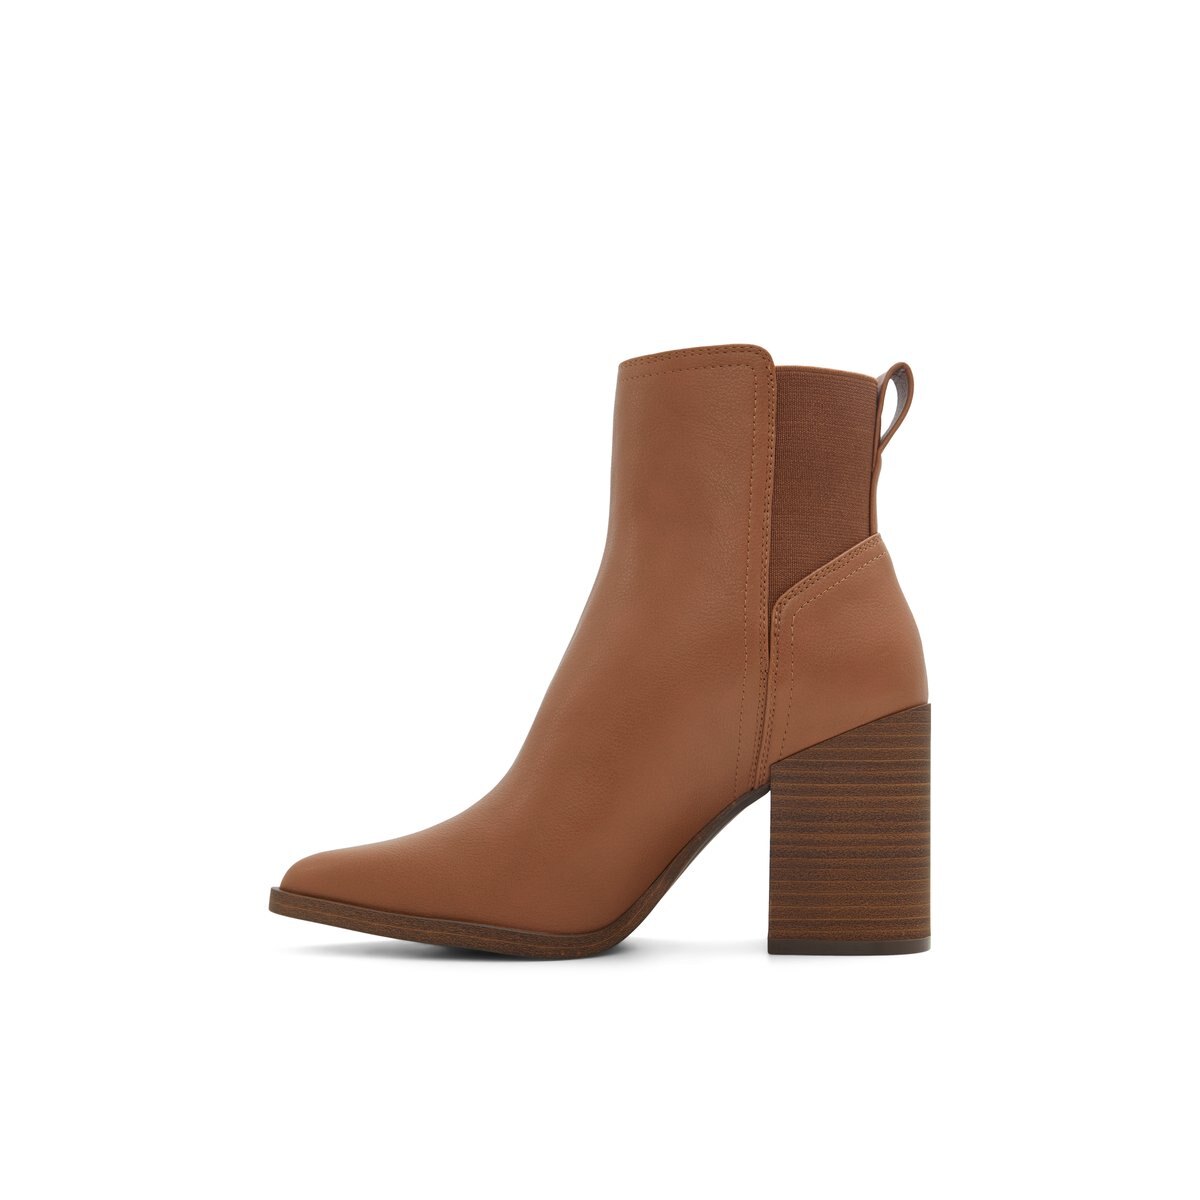 Liza Cognac Women's Ankle Boots | Call It Spring Canada